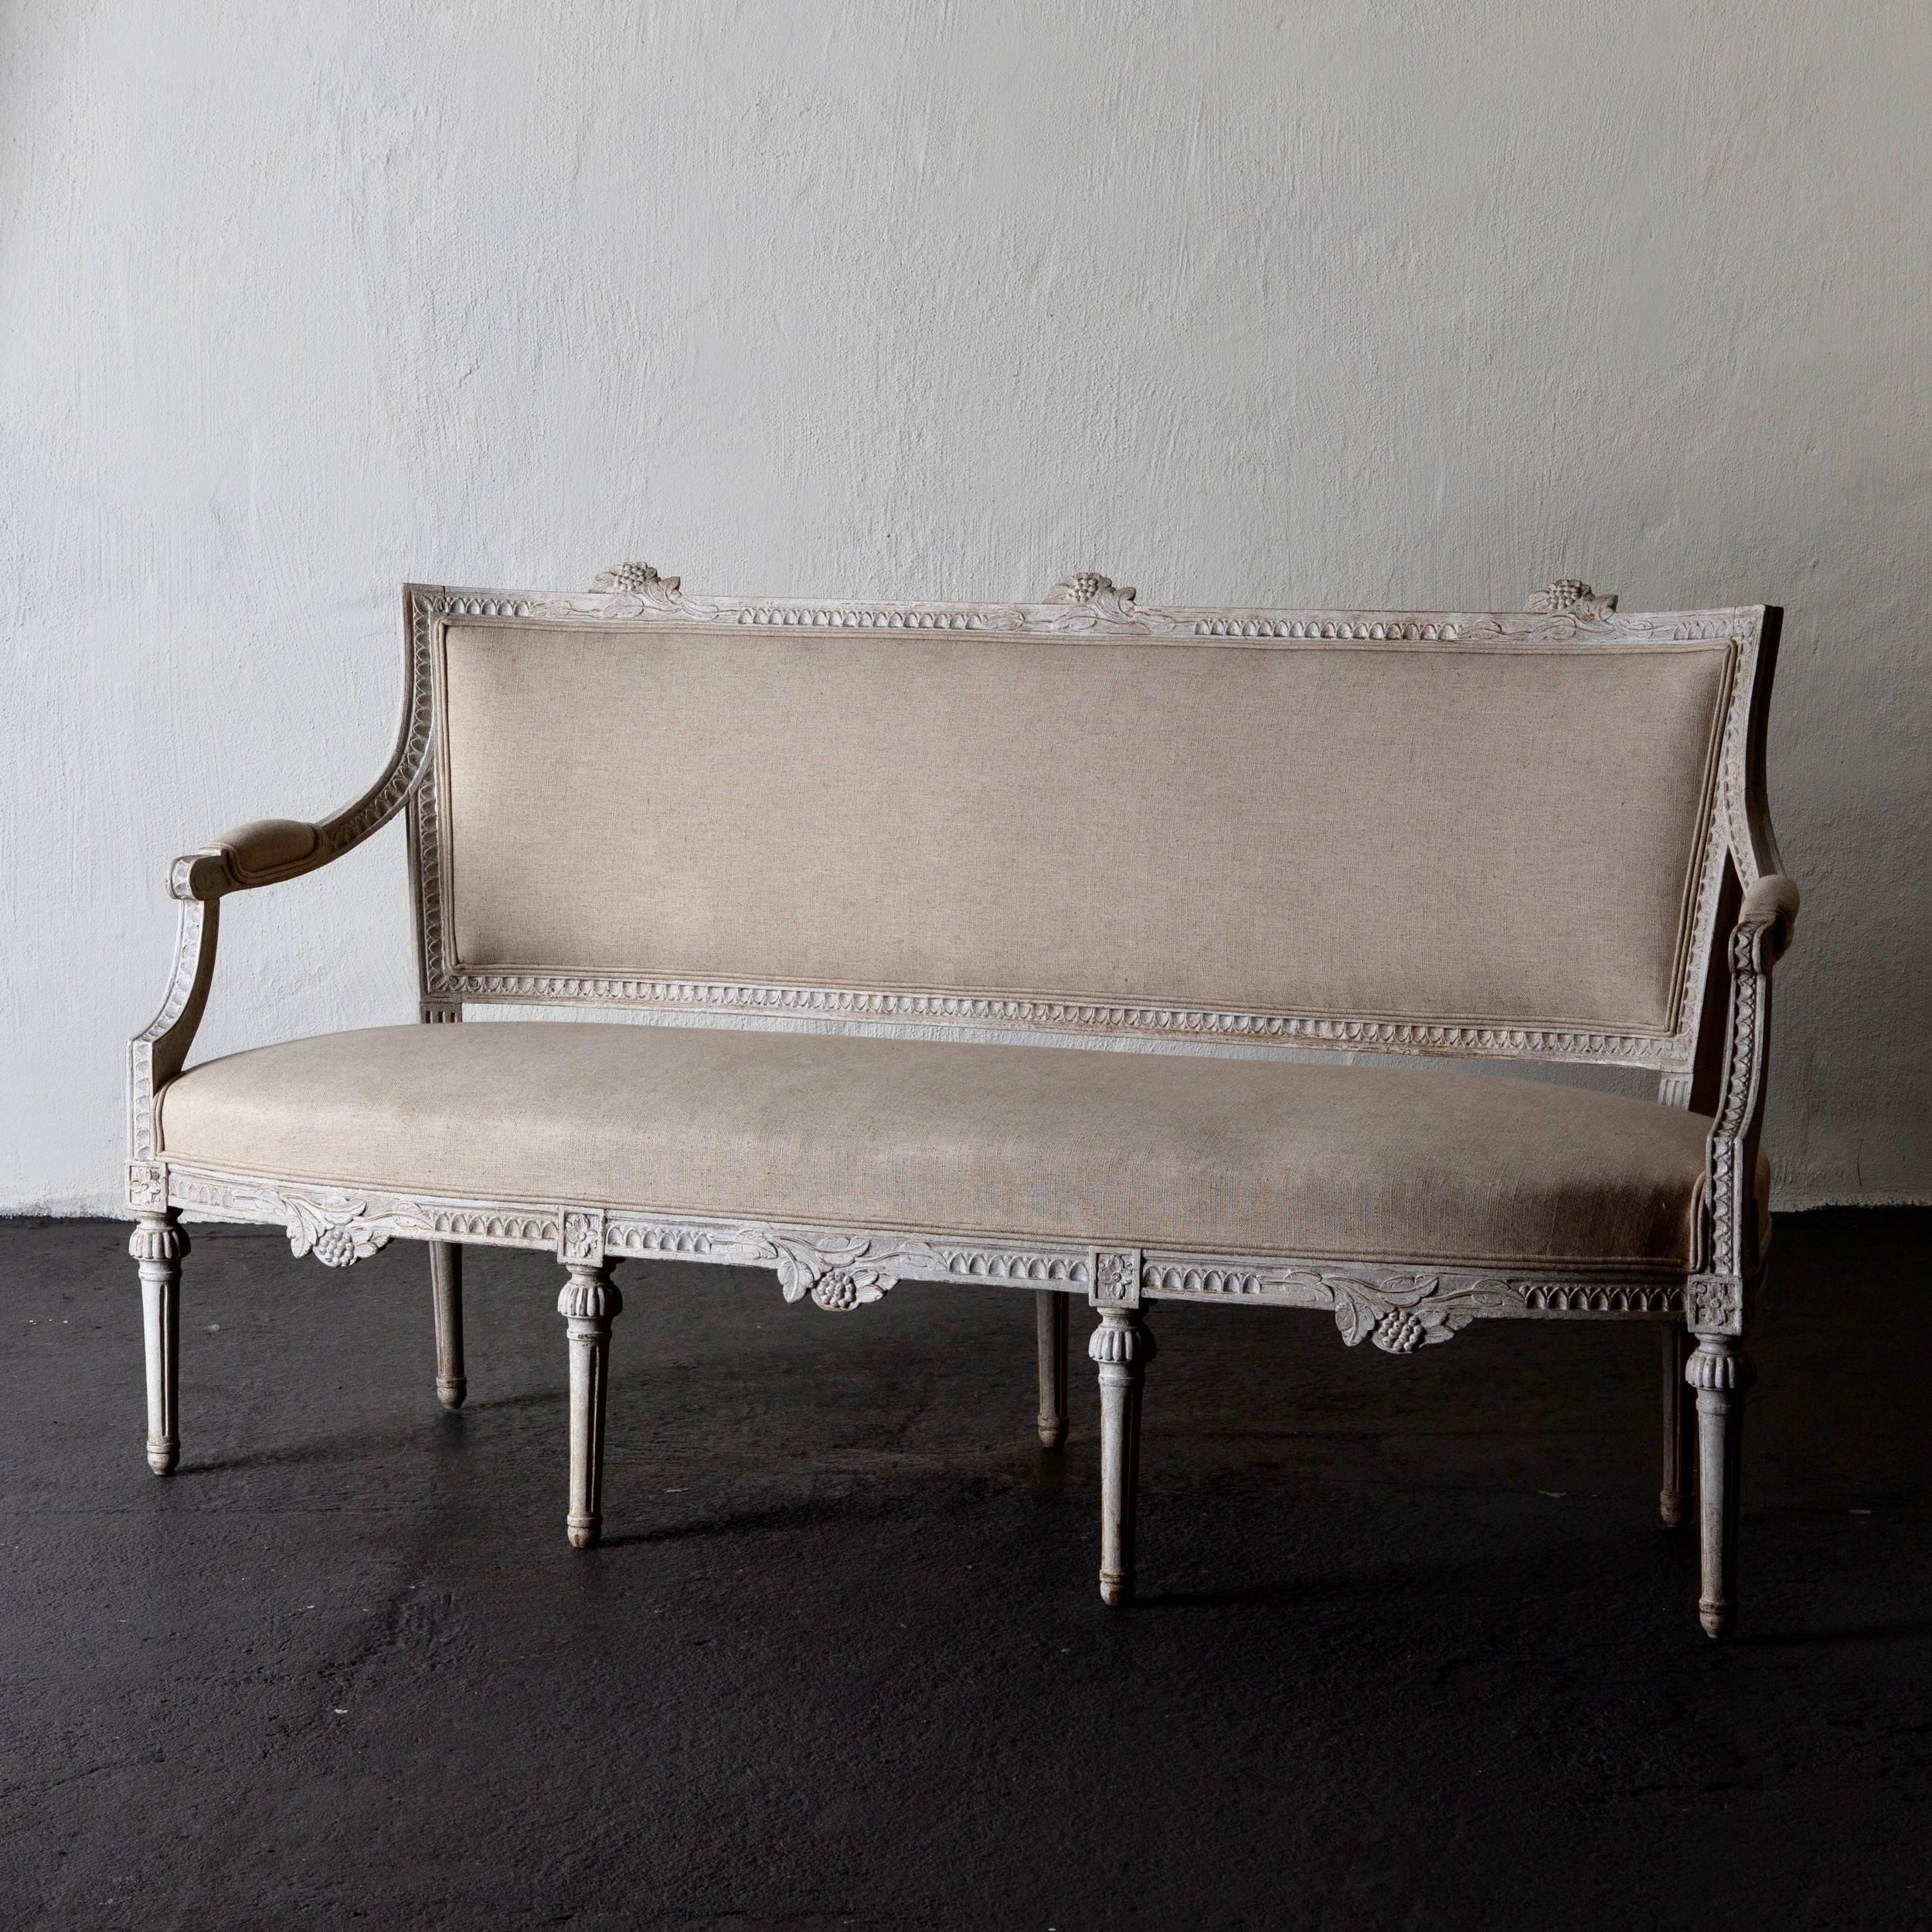 Settee bench Gustavian Swedish 19th century white Sweden. A settee bench made during the Gustavian period in Sweden. Frame in a white washed finish carved with nail tip carvings and legs rounded and channeled. Seat, back and armrests upholstered